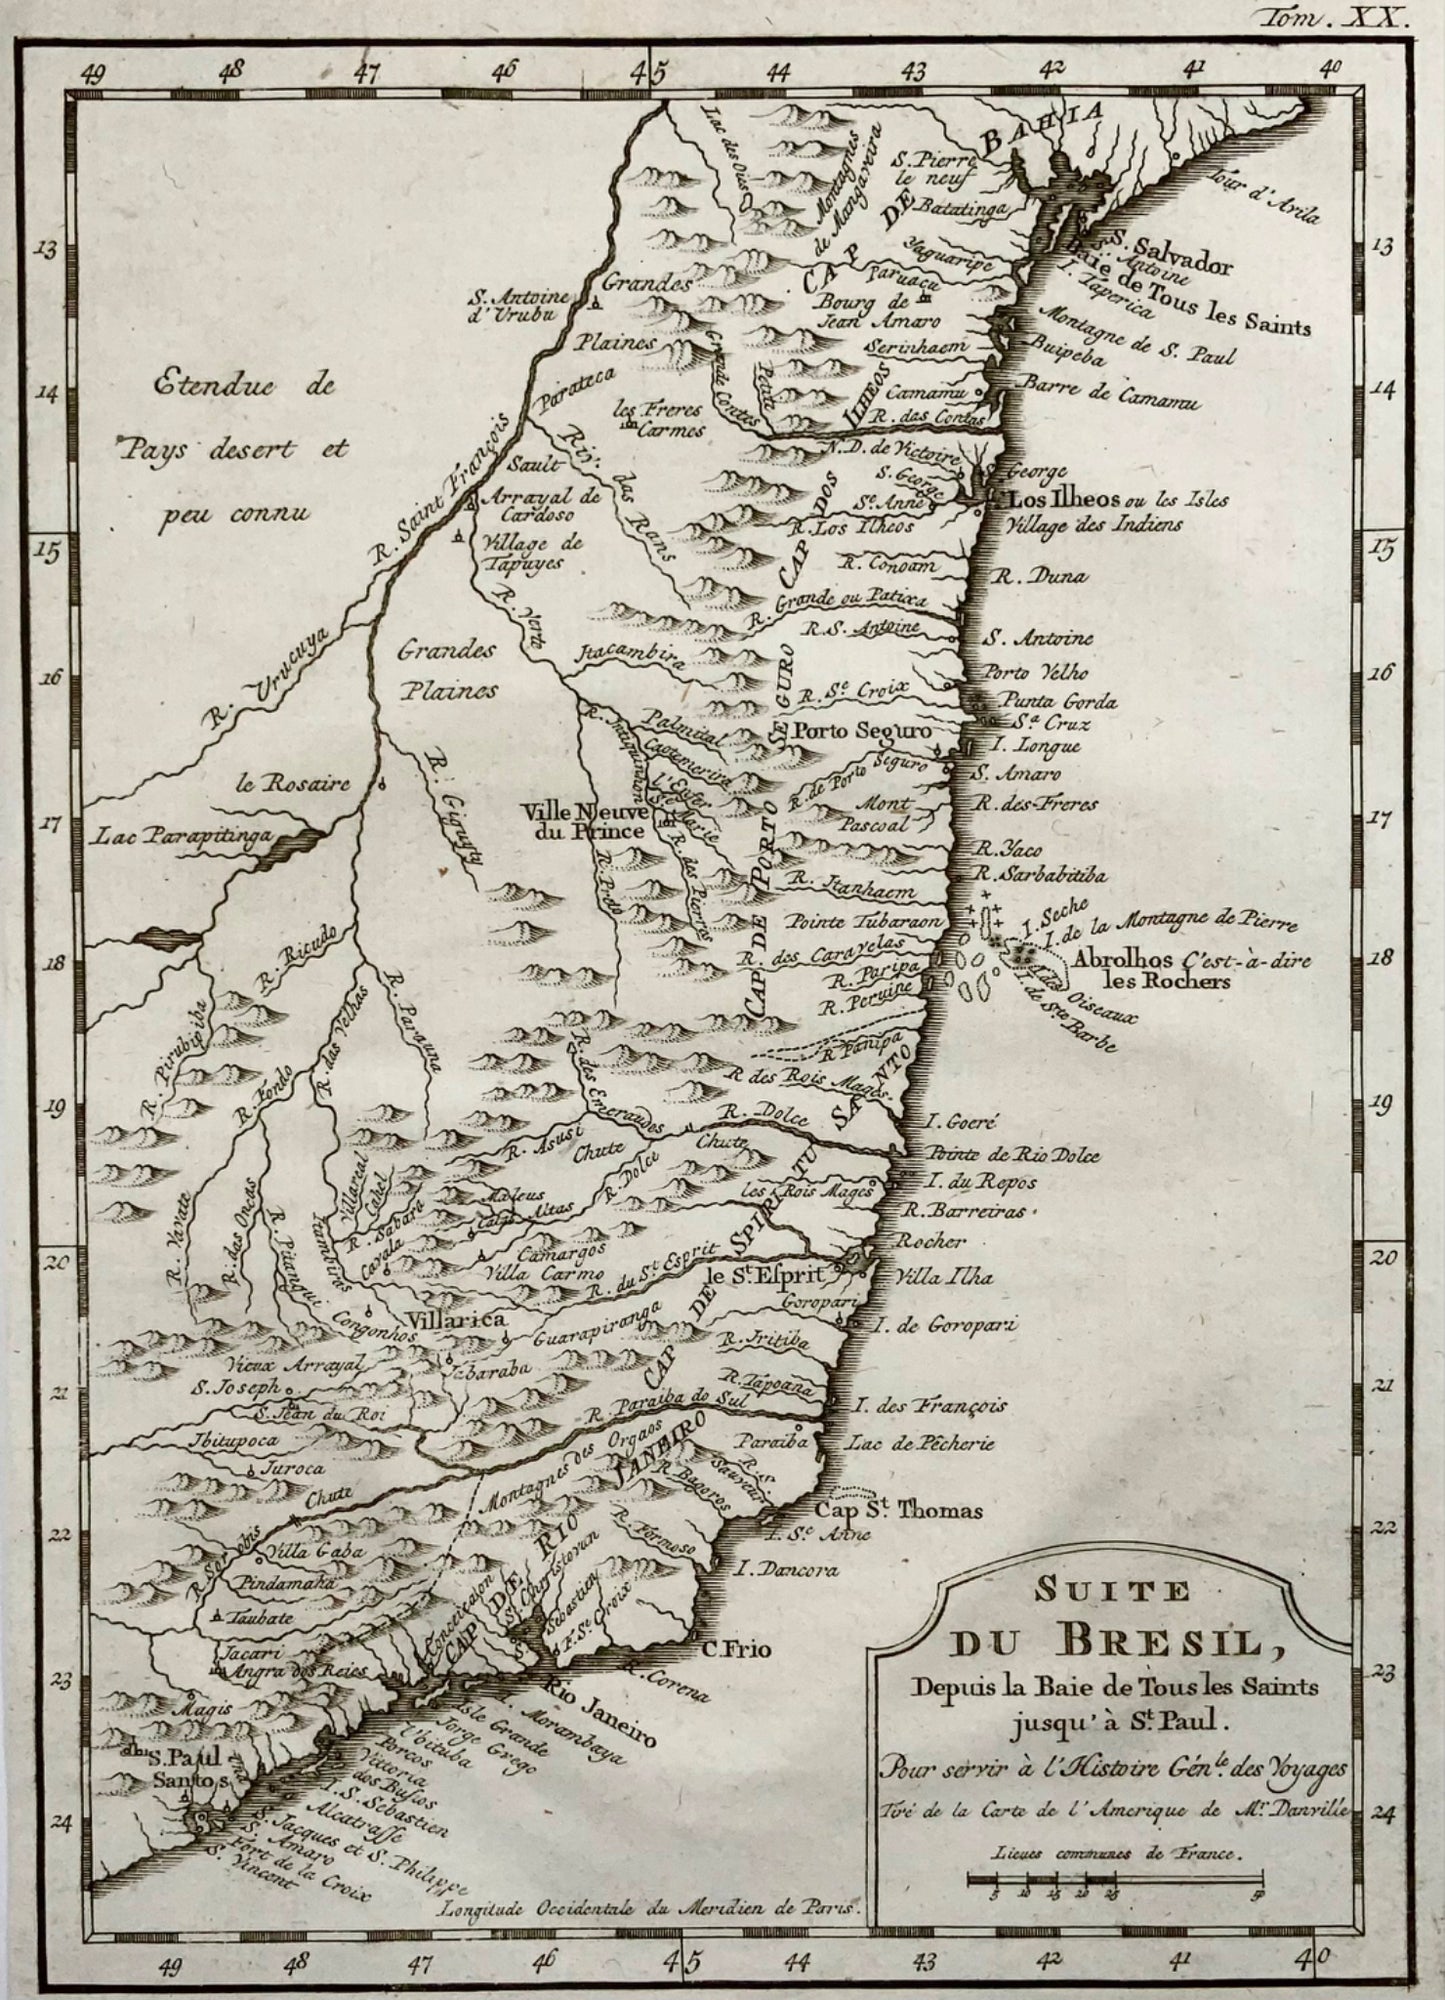 1757 Uruguay and Brazil, Jacques Bellin, ‘Suite du Bresil’, engraved map